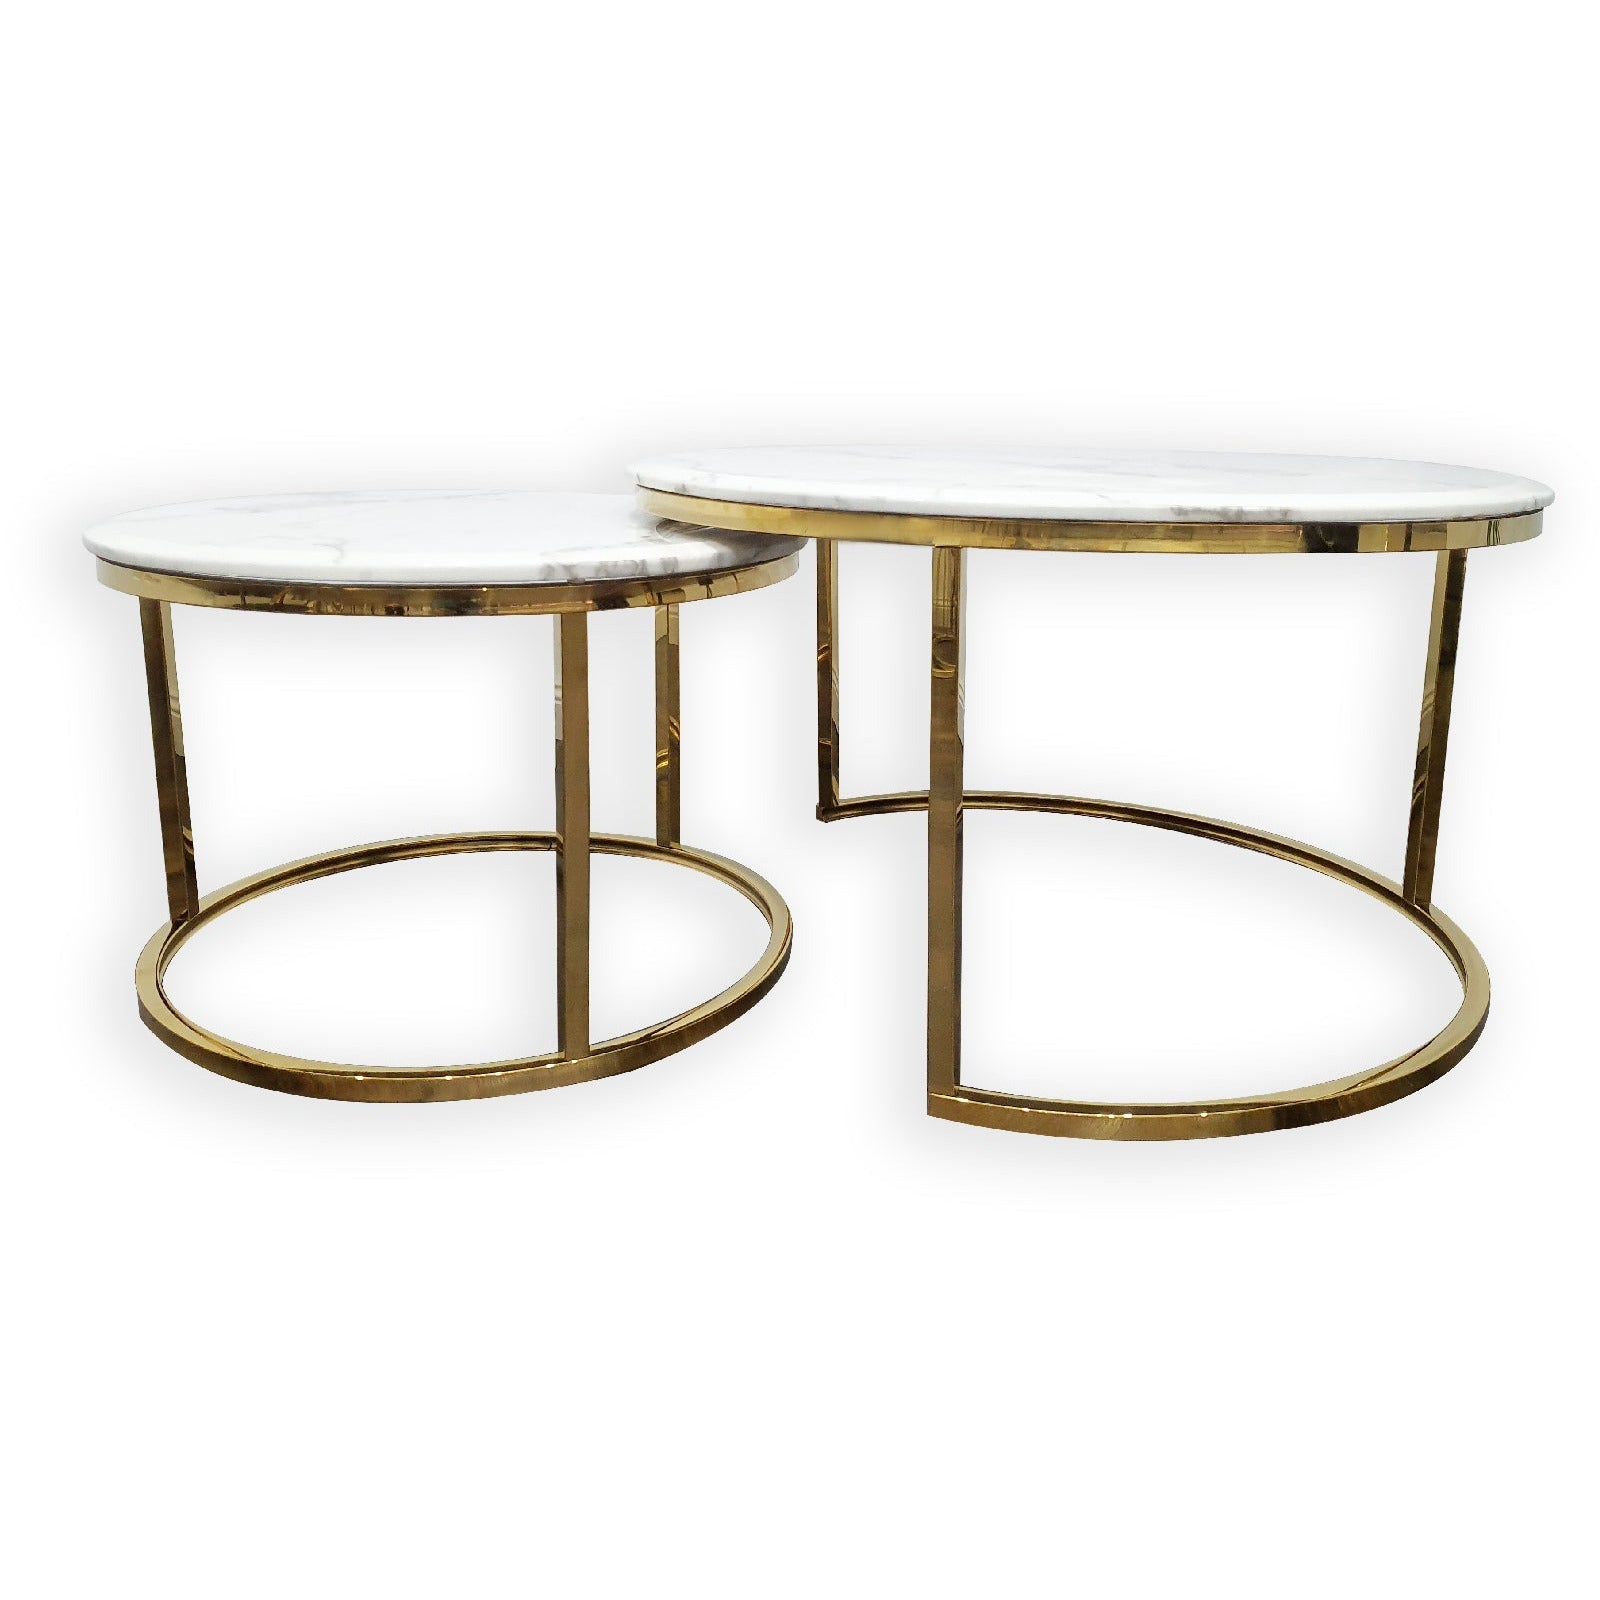 Nesting style Coffee Table - White on Gold - 60cm/40cm